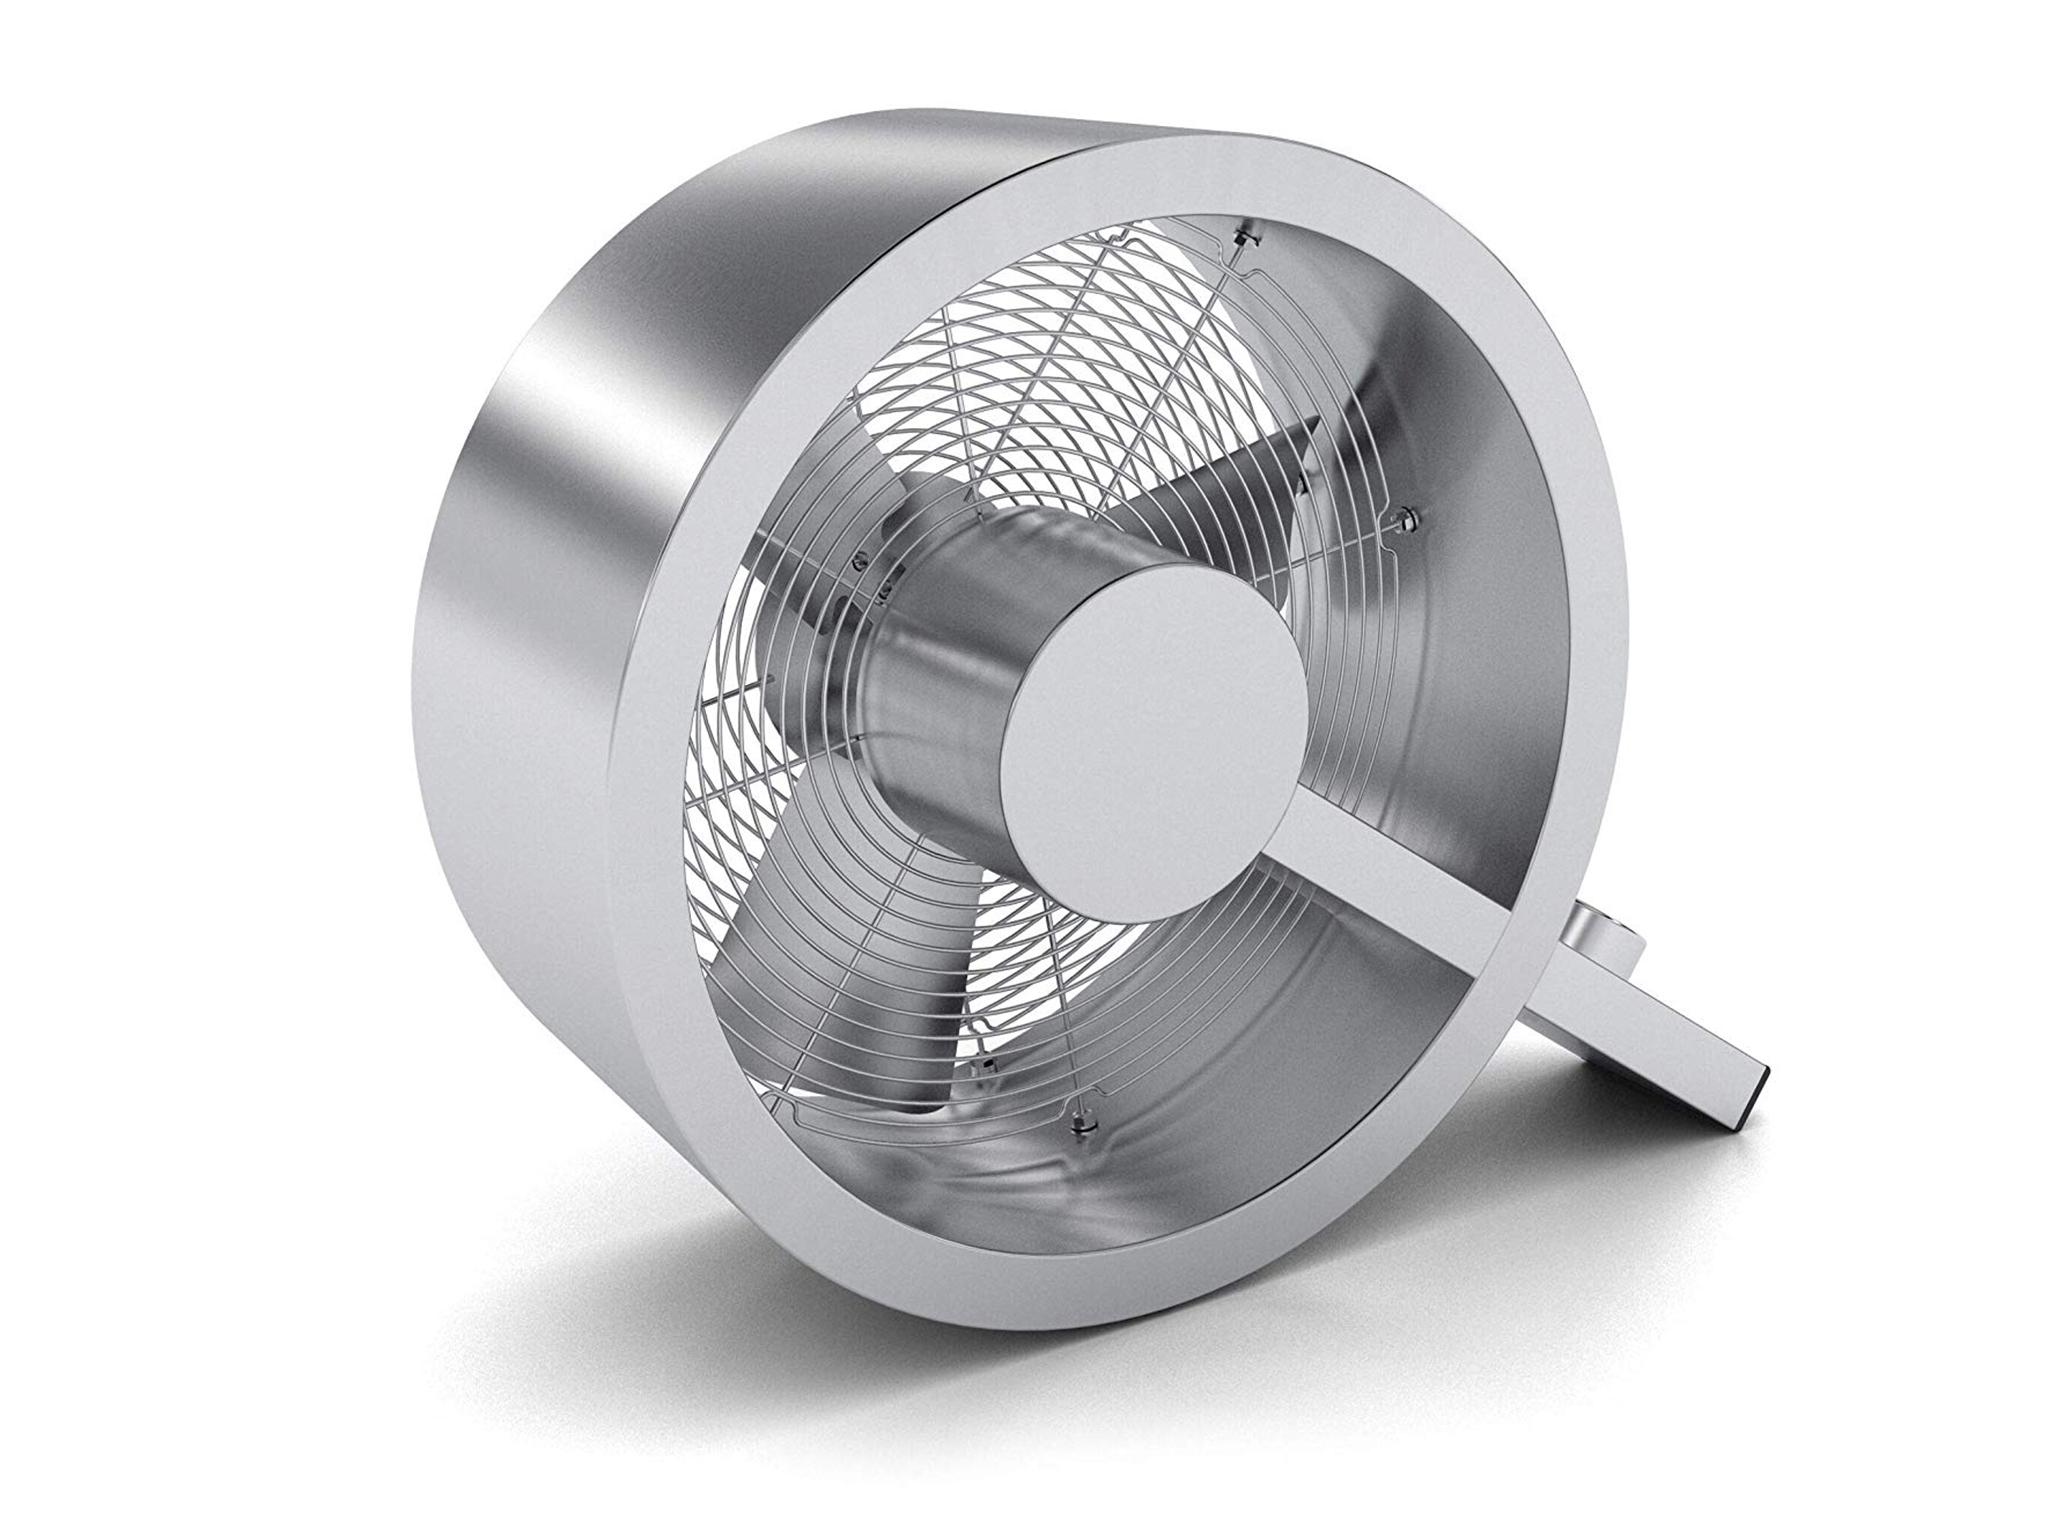 Best Cooling Fan To Purify Oscillate And Keep You Cool